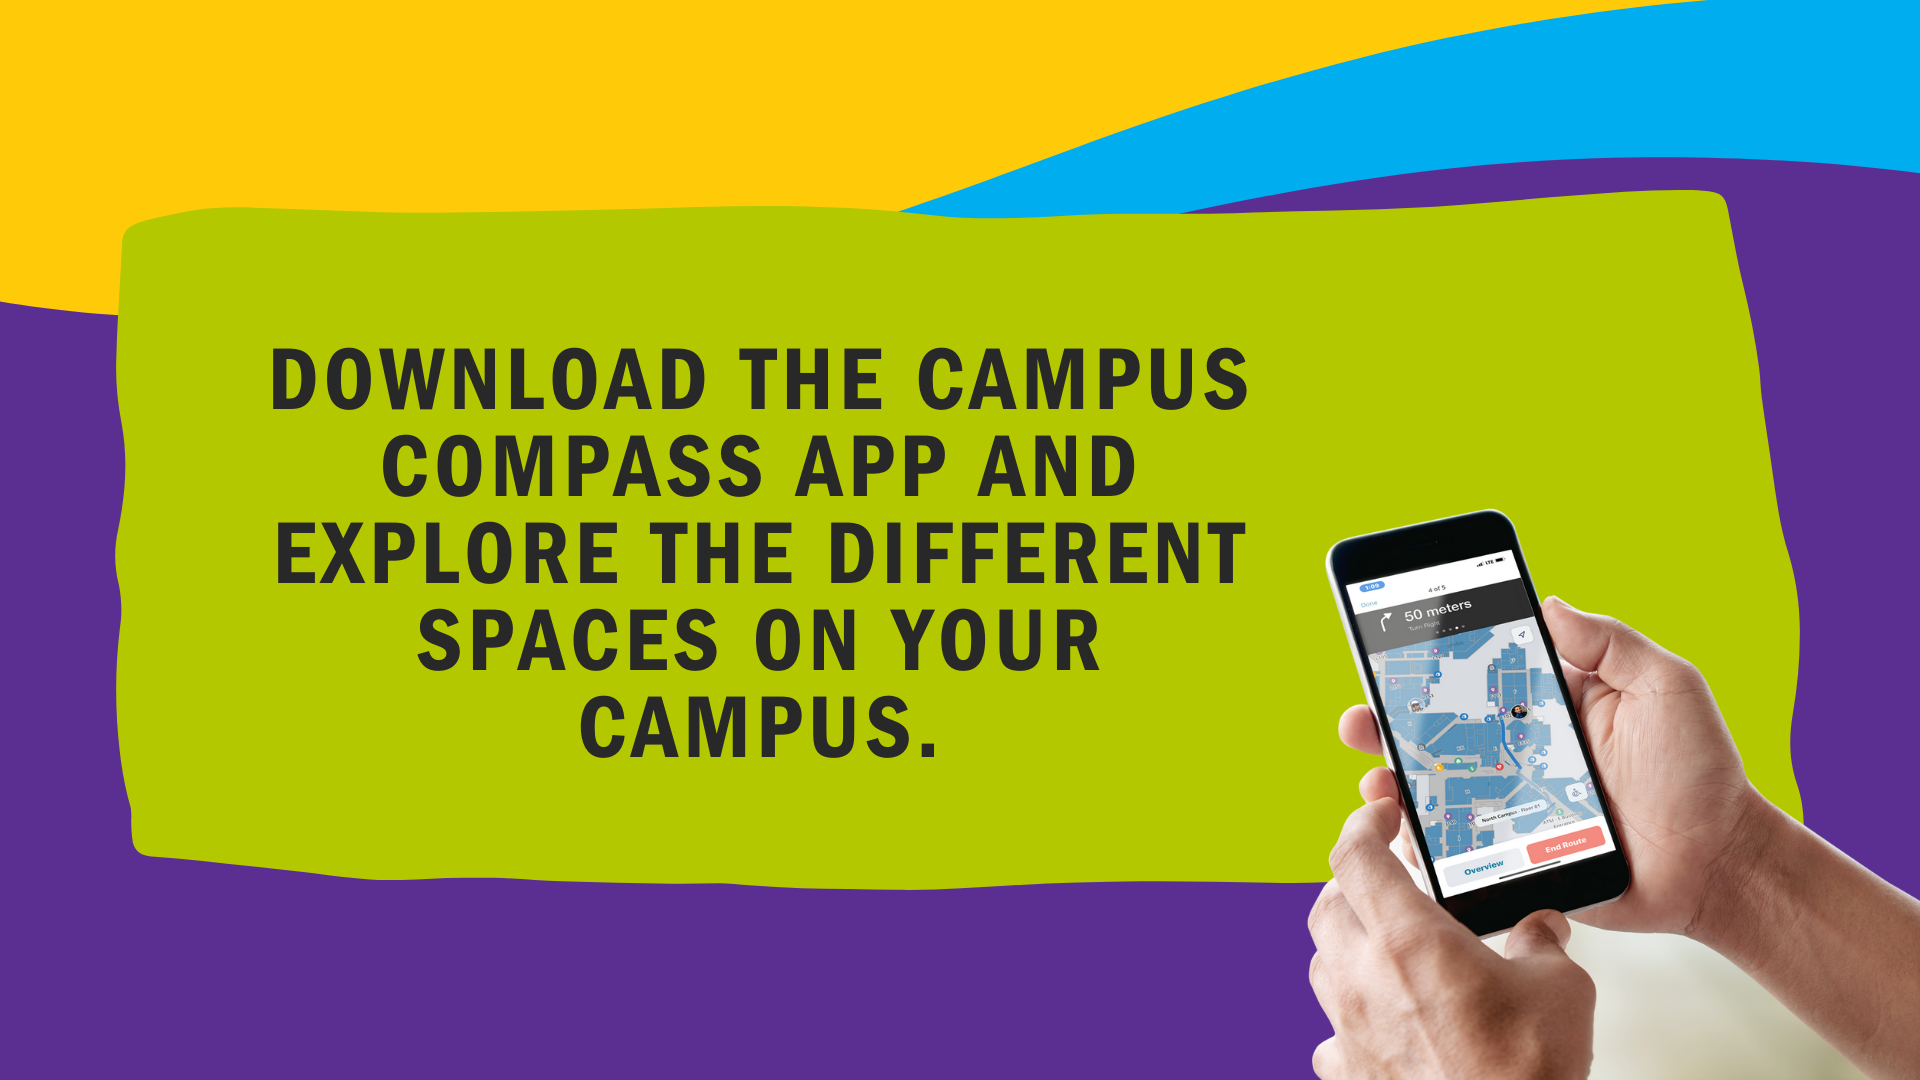 Download the Campus Compass App and explore the different spaces on your campus.